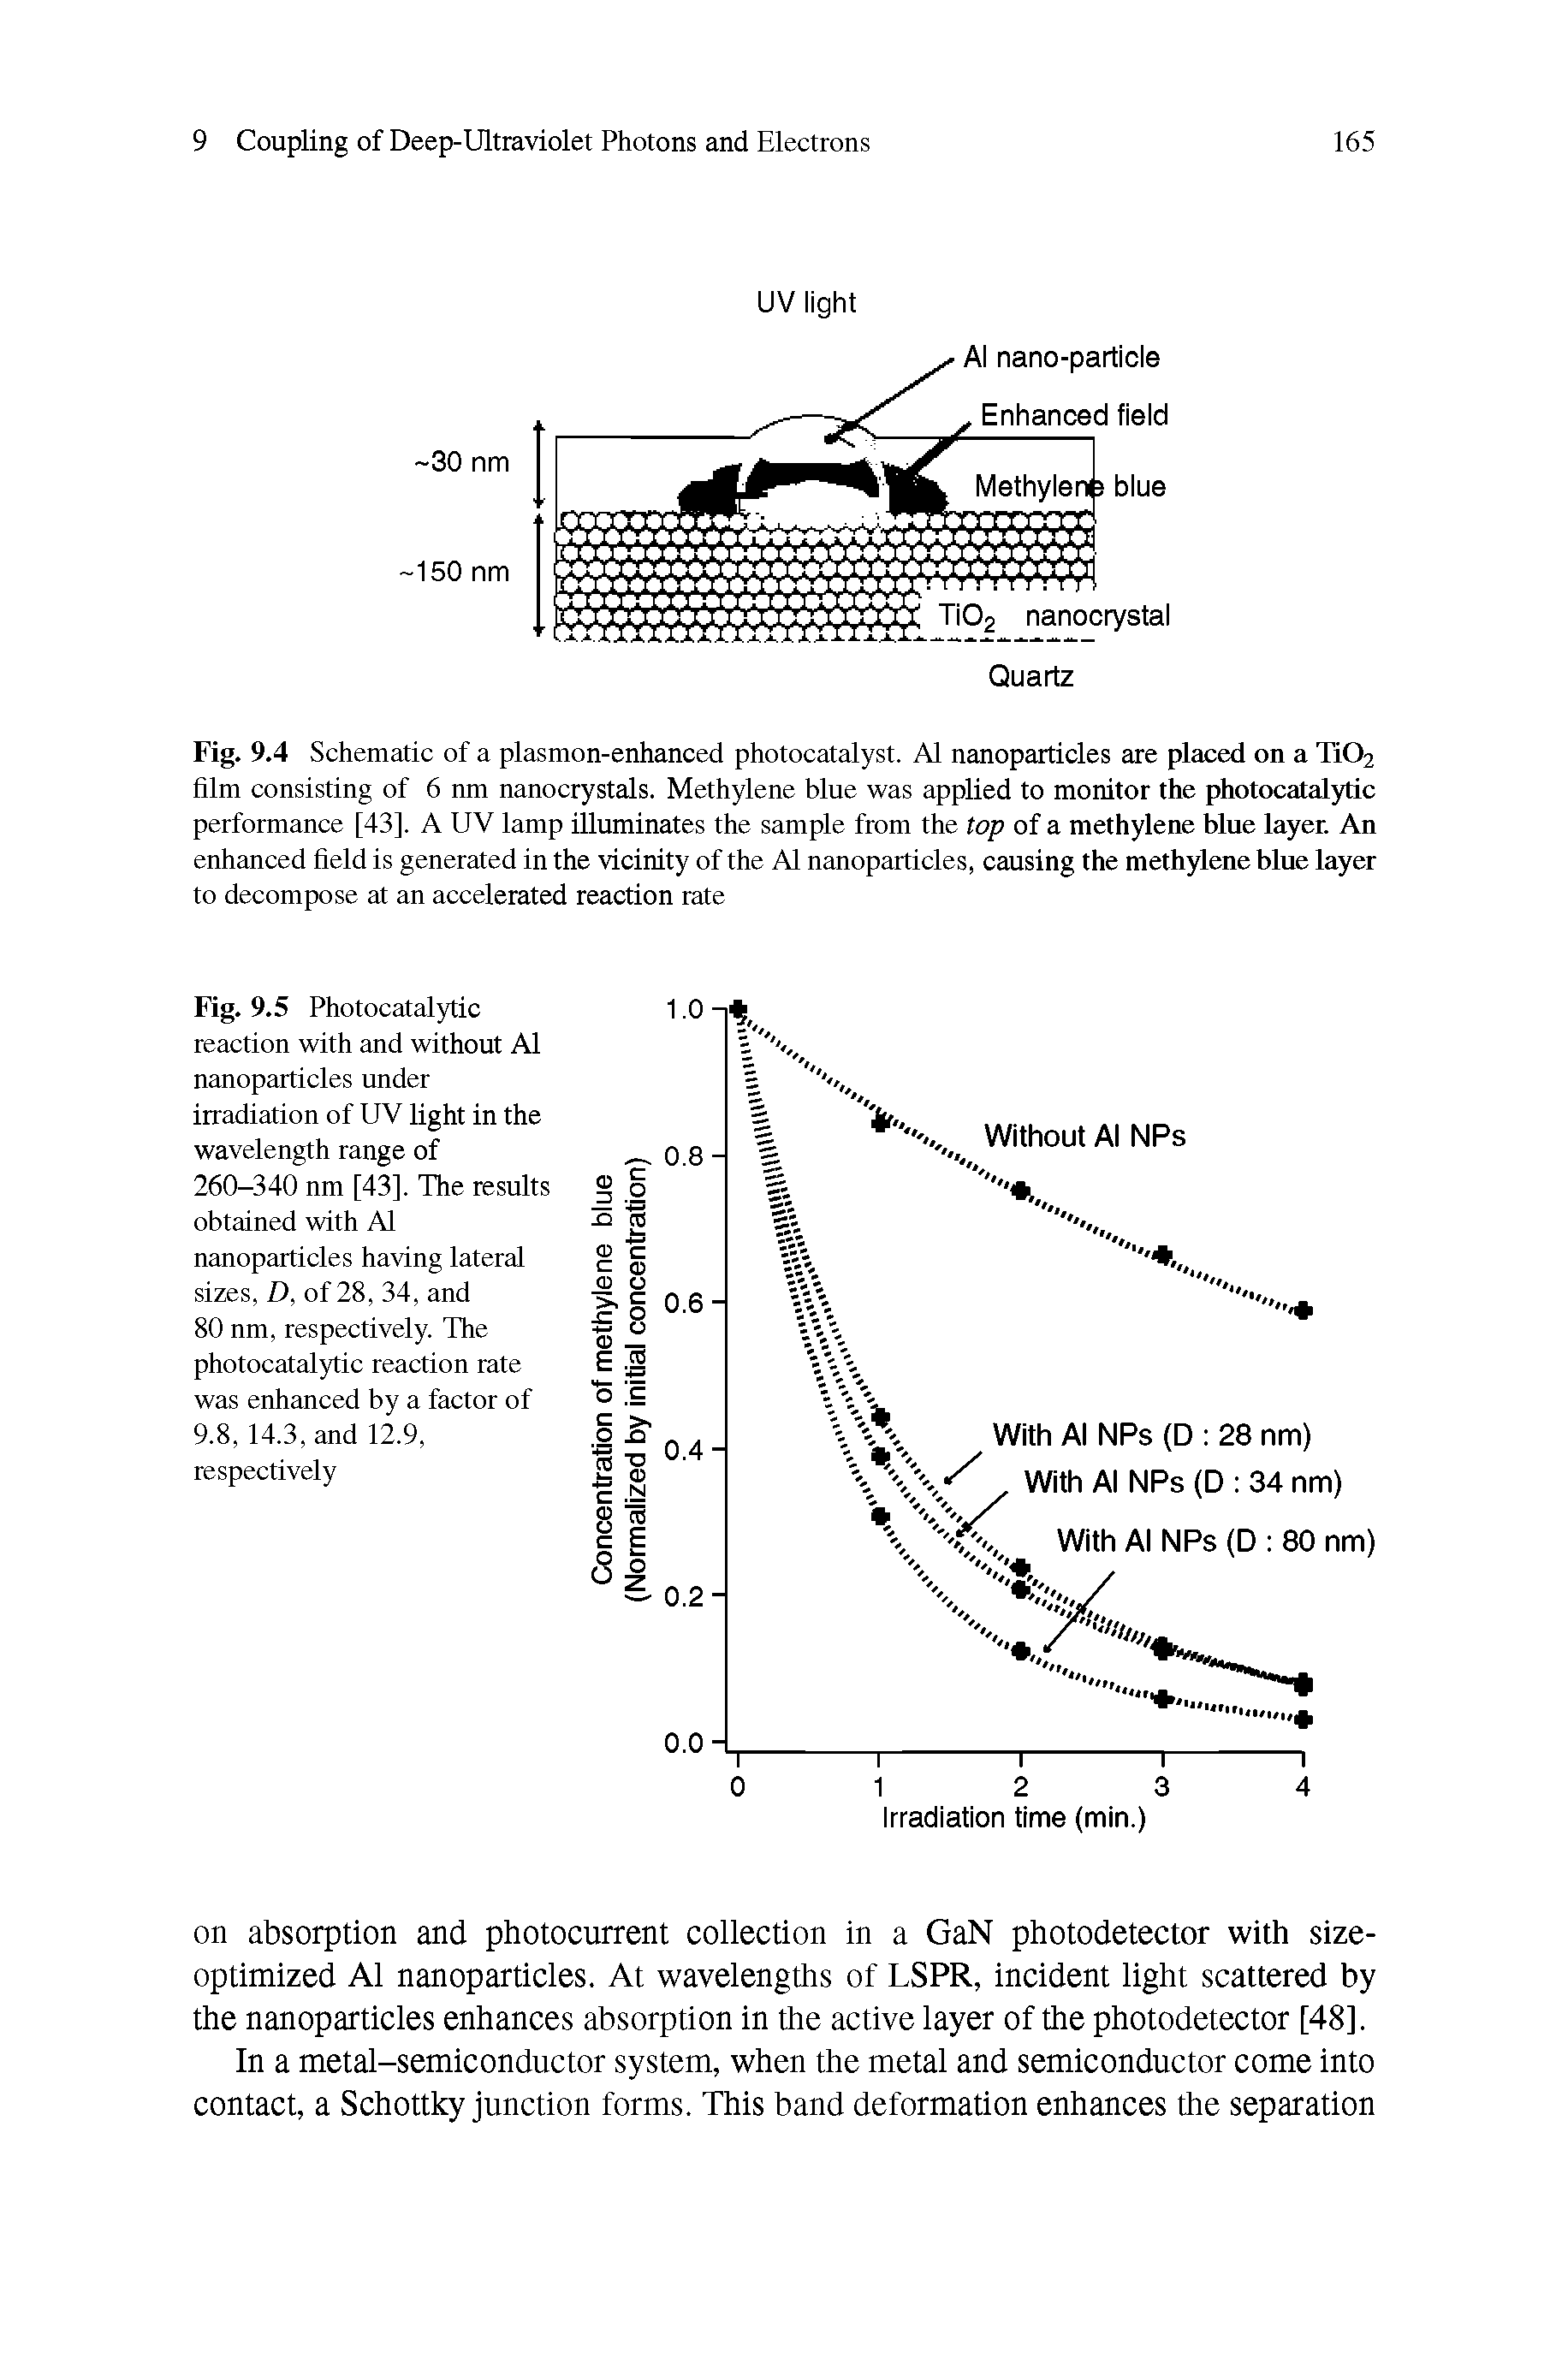 Fig. 9.5 Photocatalytic reaction with and without Al nanoparticles under irradiation of UV light in the wavelength range of 260-340 nm [43]. The results obtained with Al nanoparticles having lateral sizes, D, of 28, 34, and 80 nm, respectively. The photocatalytic reaction rate was enhanced by a factor of 9.8, 14.3, and 12.9, respectively...